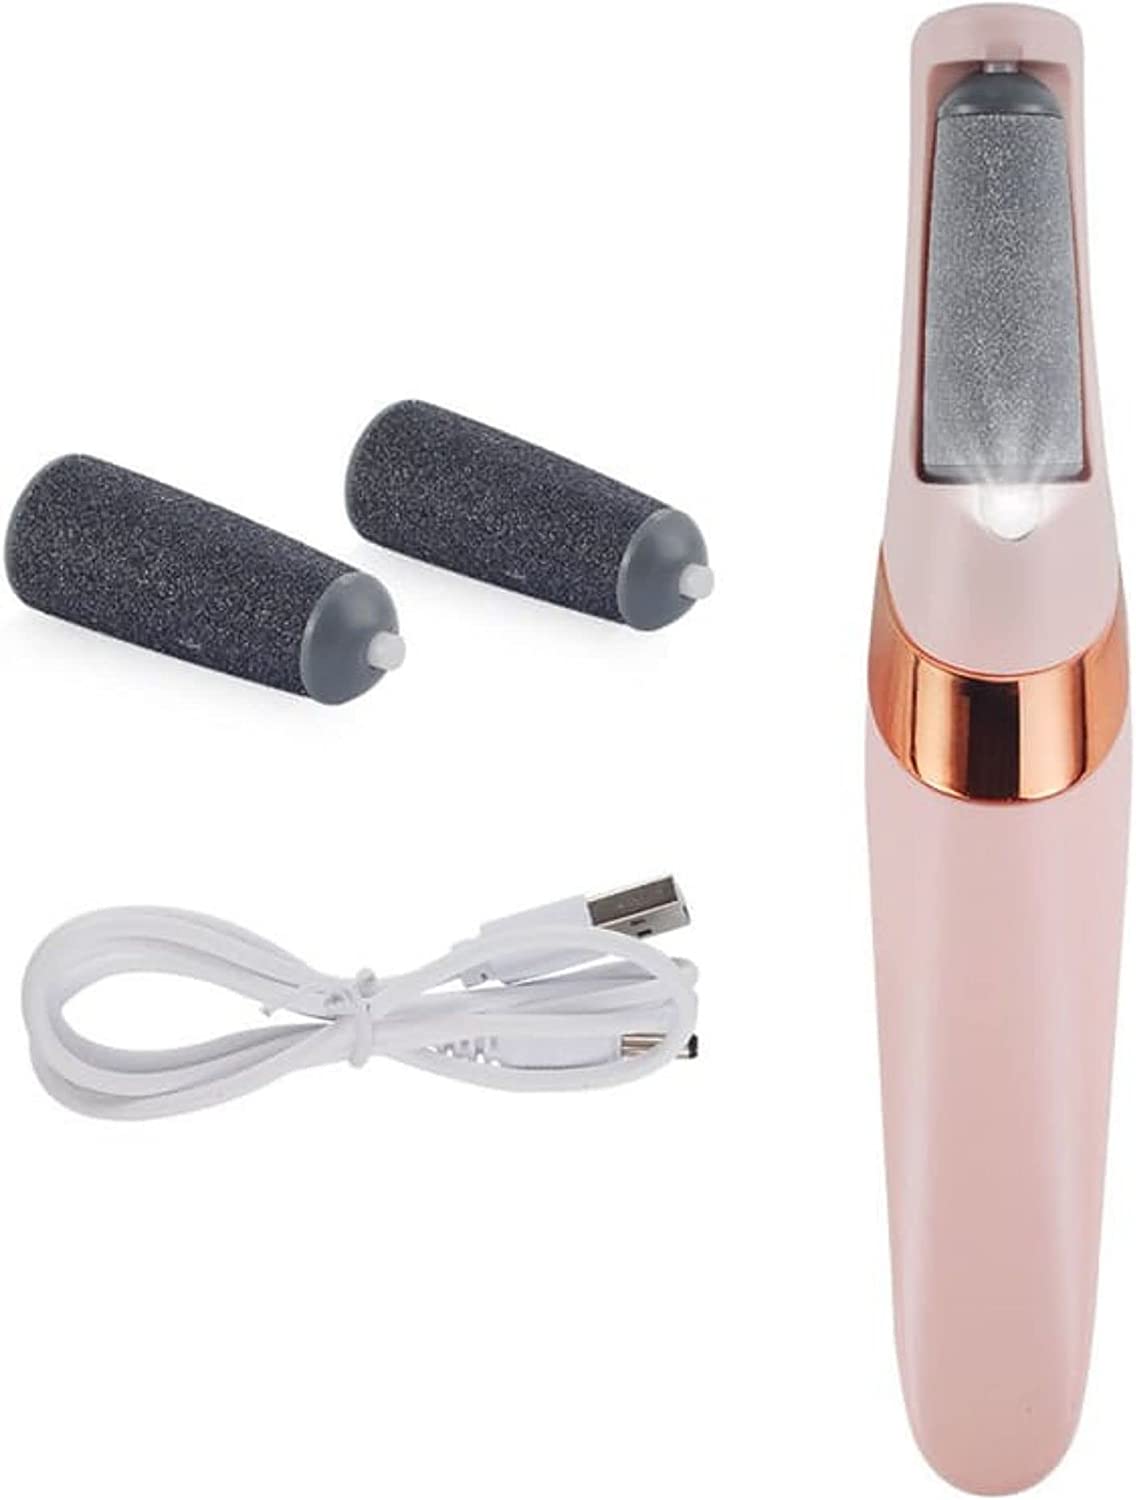 Electric Foot File for Professionals